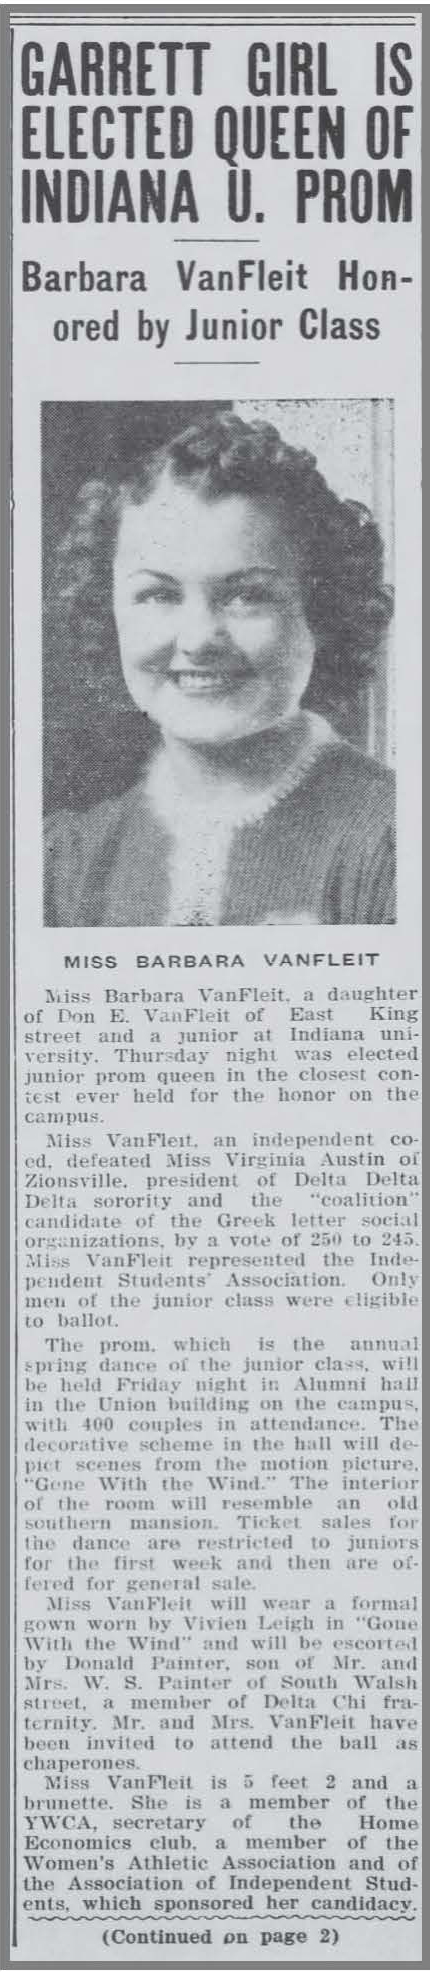 This is a black and white newspaper clippings which includes the following text and includes a picture of a college woman with short curls. GARRETT GIRL IS ELECTED QUEEN OF INDIANA U. PROM: Barbara VanFleit Honored by Junior Class Miss Barbara VanFleit of East King street and a junior at Indiana University, Thursday night was elected junior prom queen in the closest contest ever held for the honor on the campus. Miss VanFleit, an independent coed, defeated Miss Virginia Austin of Zionsville, president of Delta Delta Delta sorority and the “coalition” candidate of the Greek letter social organizations by a vote of 256 to 245. Miss VanFleit represented the Independent Students’ Association. Only men of the junior class were eligible to ballot. The prom, which is the annual spring dance of the junior class, will be held Friday night in Alumni Hall in the Union building on campus with 400 couples in attendance. The decorative scheme in the hall will depict scenes from the motion picture “Gone with the Wind.” The interior of the room will resemble an old southern mansion. Ticket sales for this dance are restricted to juniors for the first week and then are offered for general sale. Miss VanFleit will wear a formal gown worn by Vivien Leigh in “Gone with the Wind” and will be escorted by Donald Painter, son of Mr. and Mrs. W.S. Painter of South Walsh street, a member of the Delta Chi fraternity. Mr. and Mrs. VanFleit have been invited to attend the ball as chaperones. Miss VanFleit is 5 feet 2 and a brunette. She is a member of the YWCA, secretary of the Home Economics club, a member of the Women’s Athletic Association and of the Association of Independents Students, which sponsored her candidacy. 